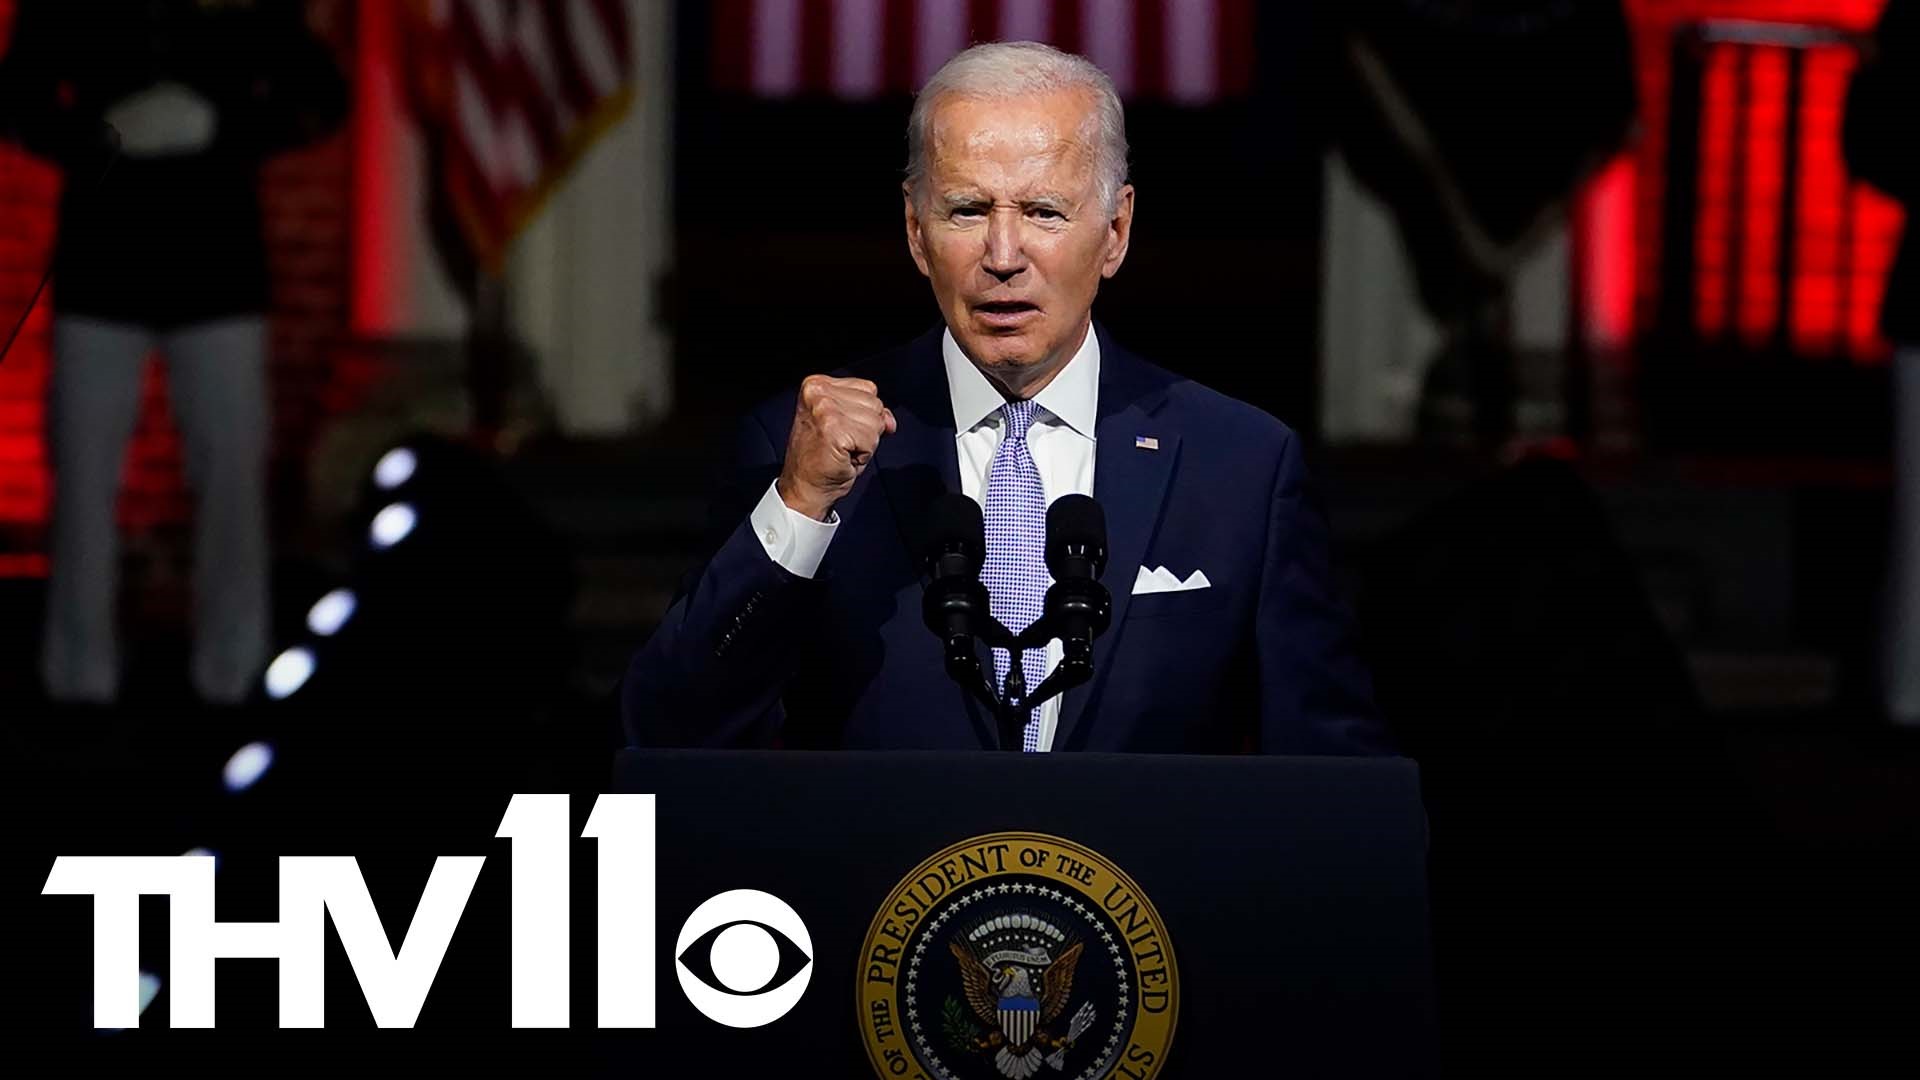 Biden used his prime-time speech to argue that Trump and “Make America Great Again” allies are a threat to democracy and the American way of life.